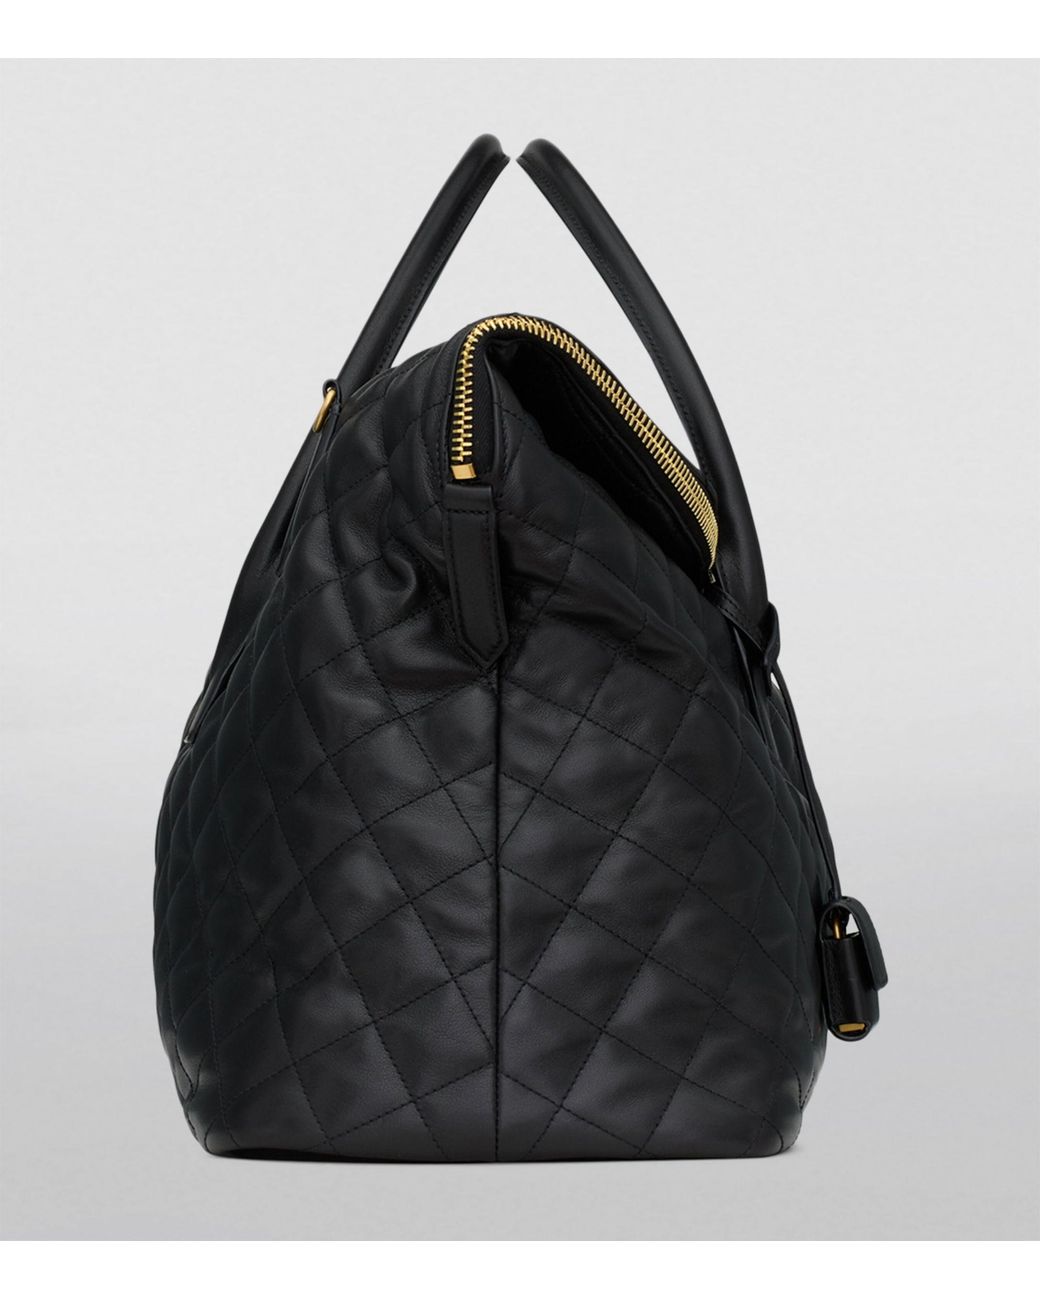 Saint Laurent Giant Quilted Leather Es Travel Bag in Black